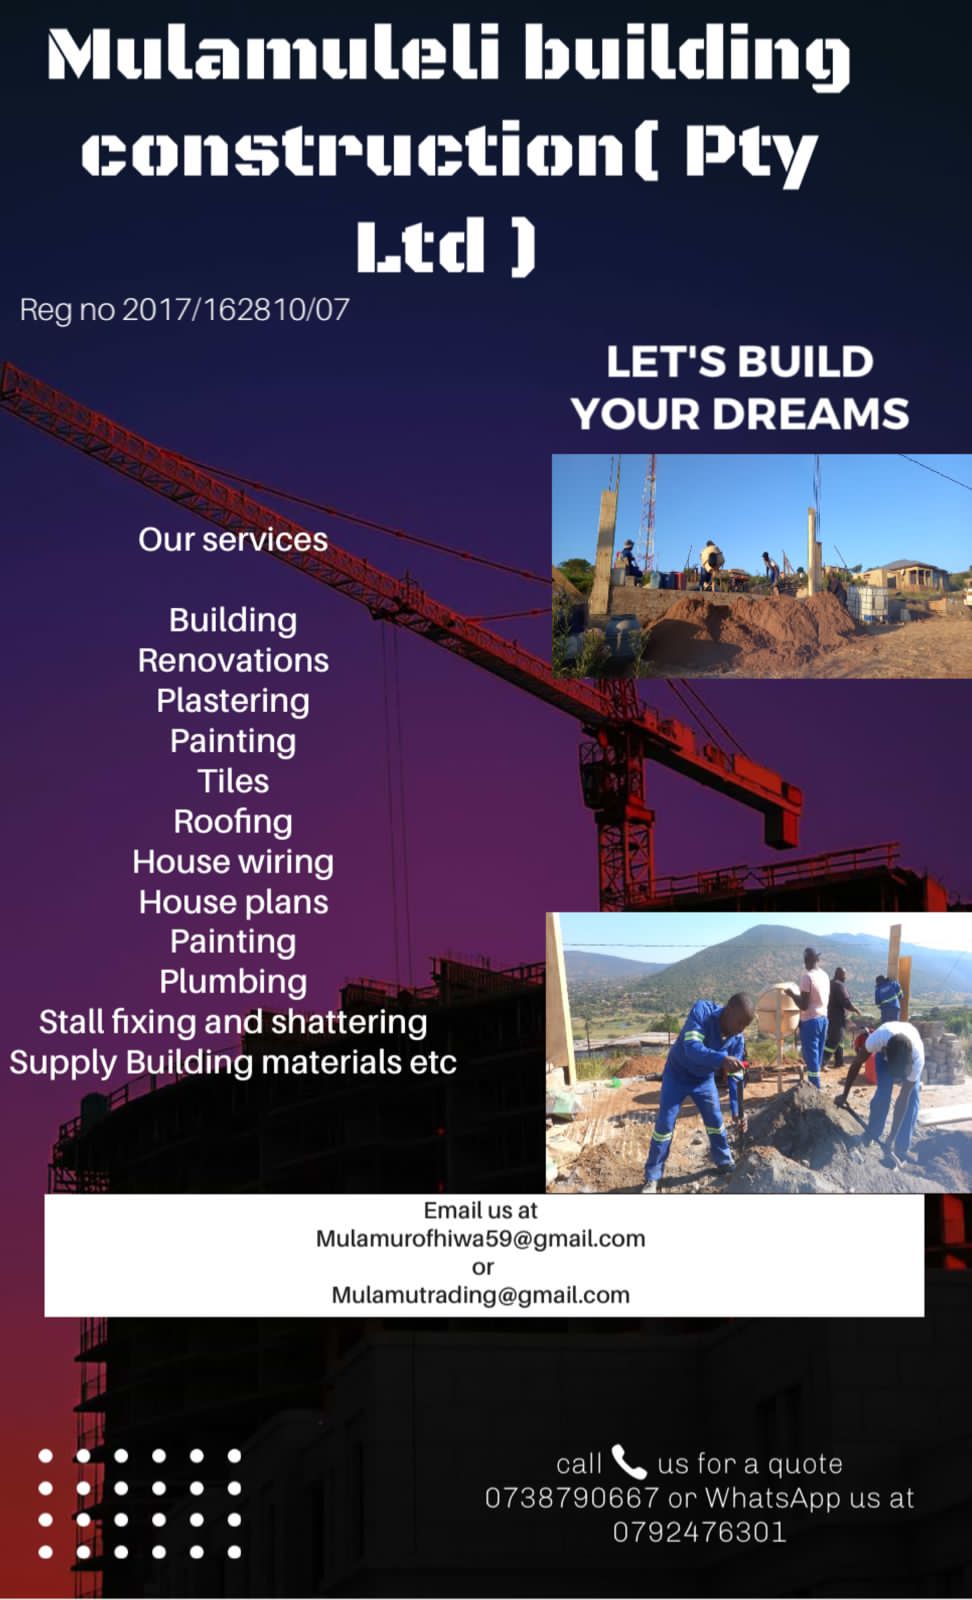 Our range of construction services